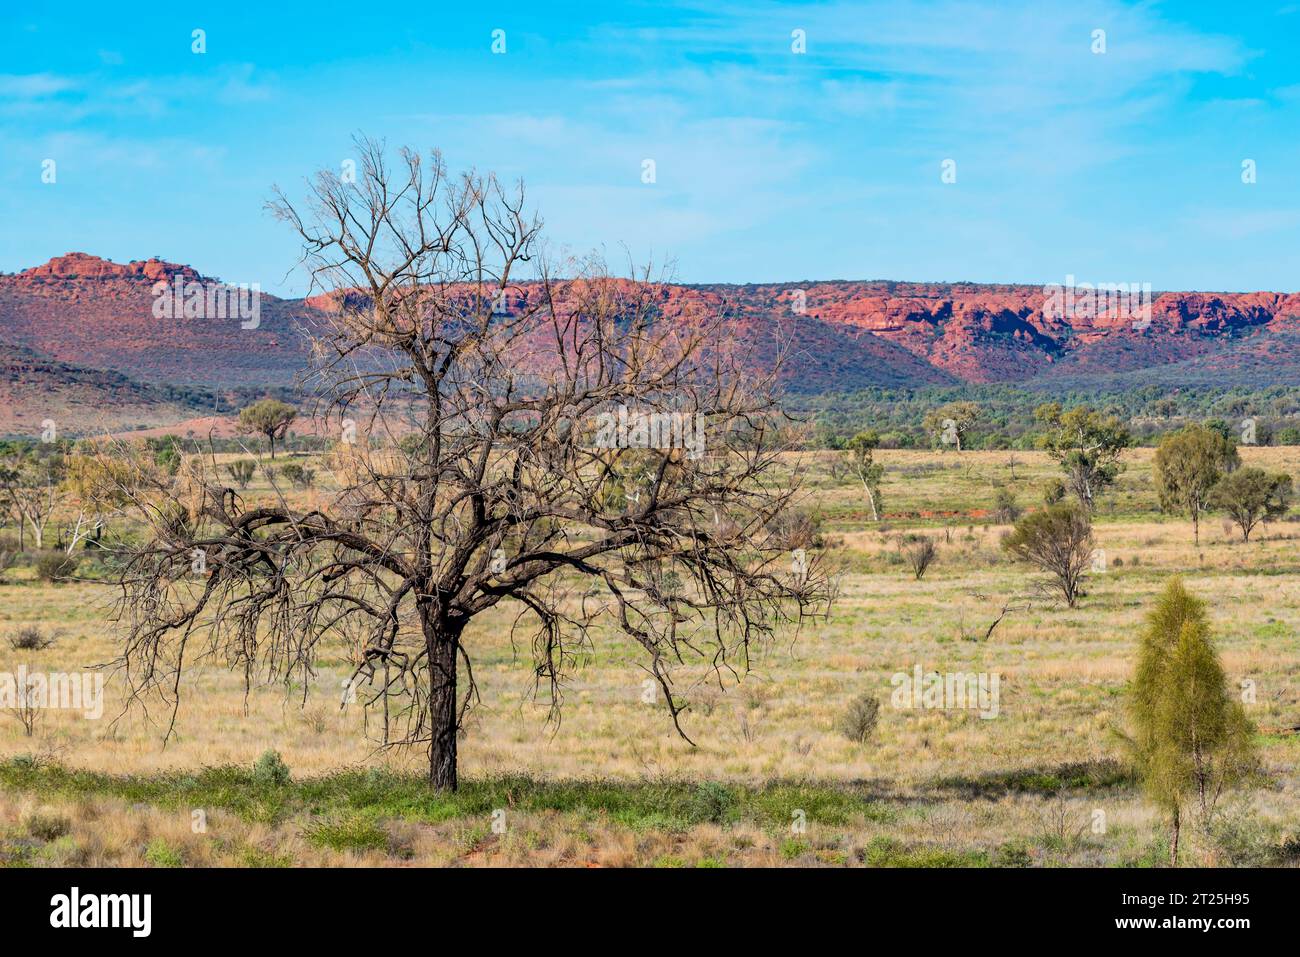 The Gorge Gill Range near Kings Canyon (Watarrka) Northern Territory, Australia, with a young and old Desert Oak tree in the foreground Stock Photo